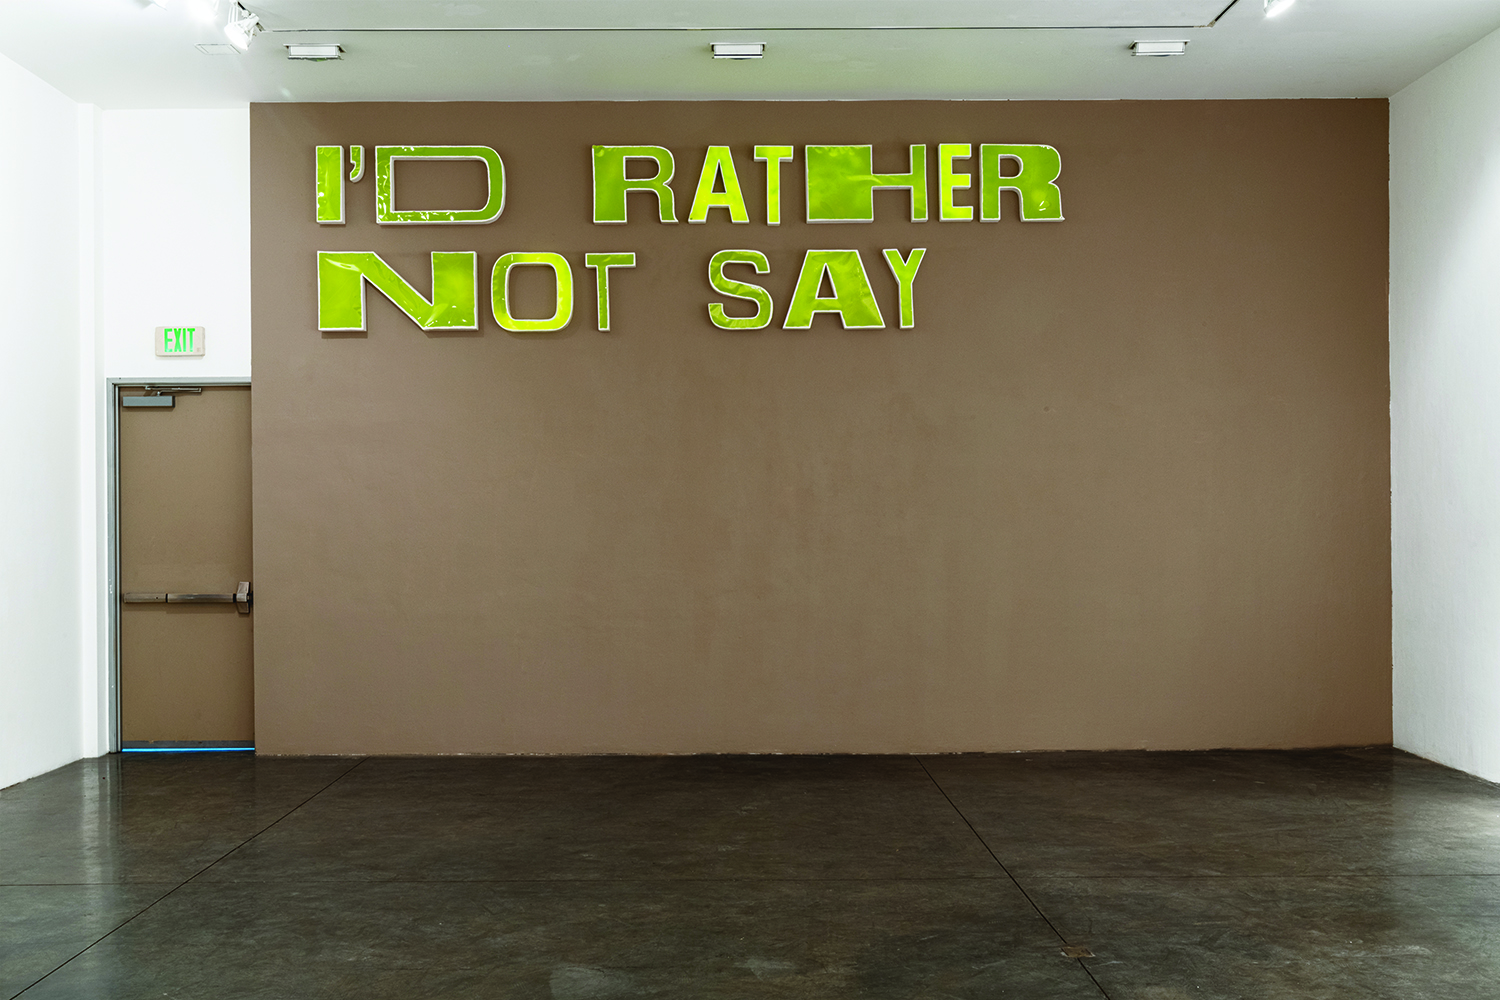 "I'D RATHER NOT SAY" Vinyl plaster, cardboard, clear acrylic sheets, spray paint, LED strips